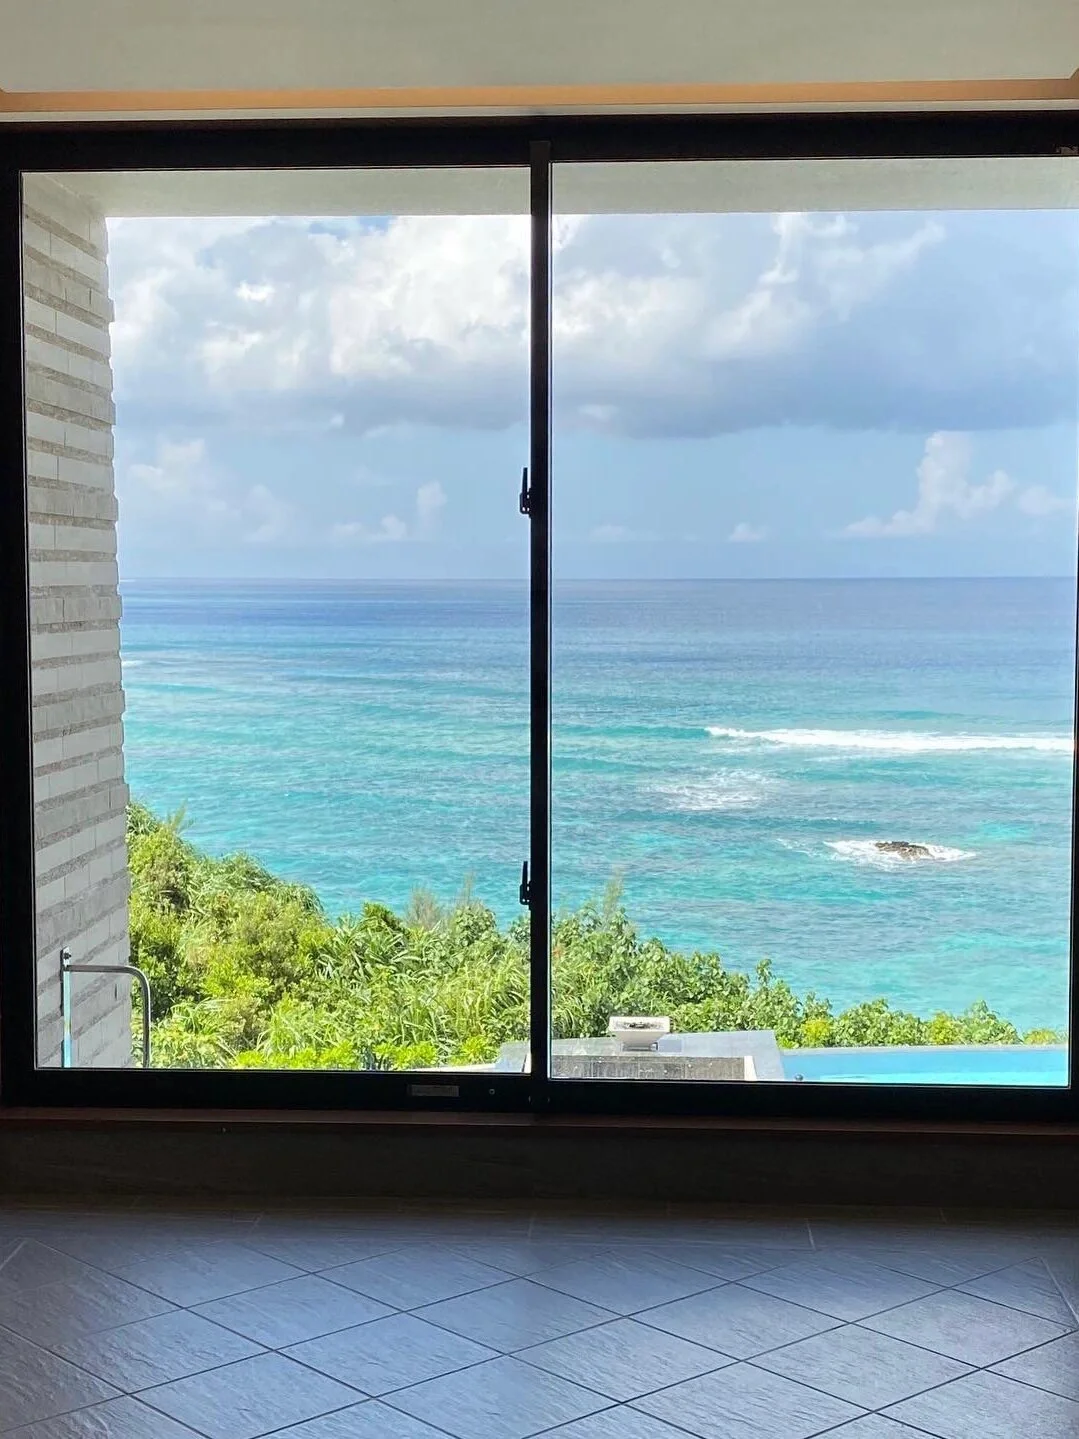 Okinawa-When traveling to Okinawa, you must stay at Halekulani, a top hotel that you cannot miss